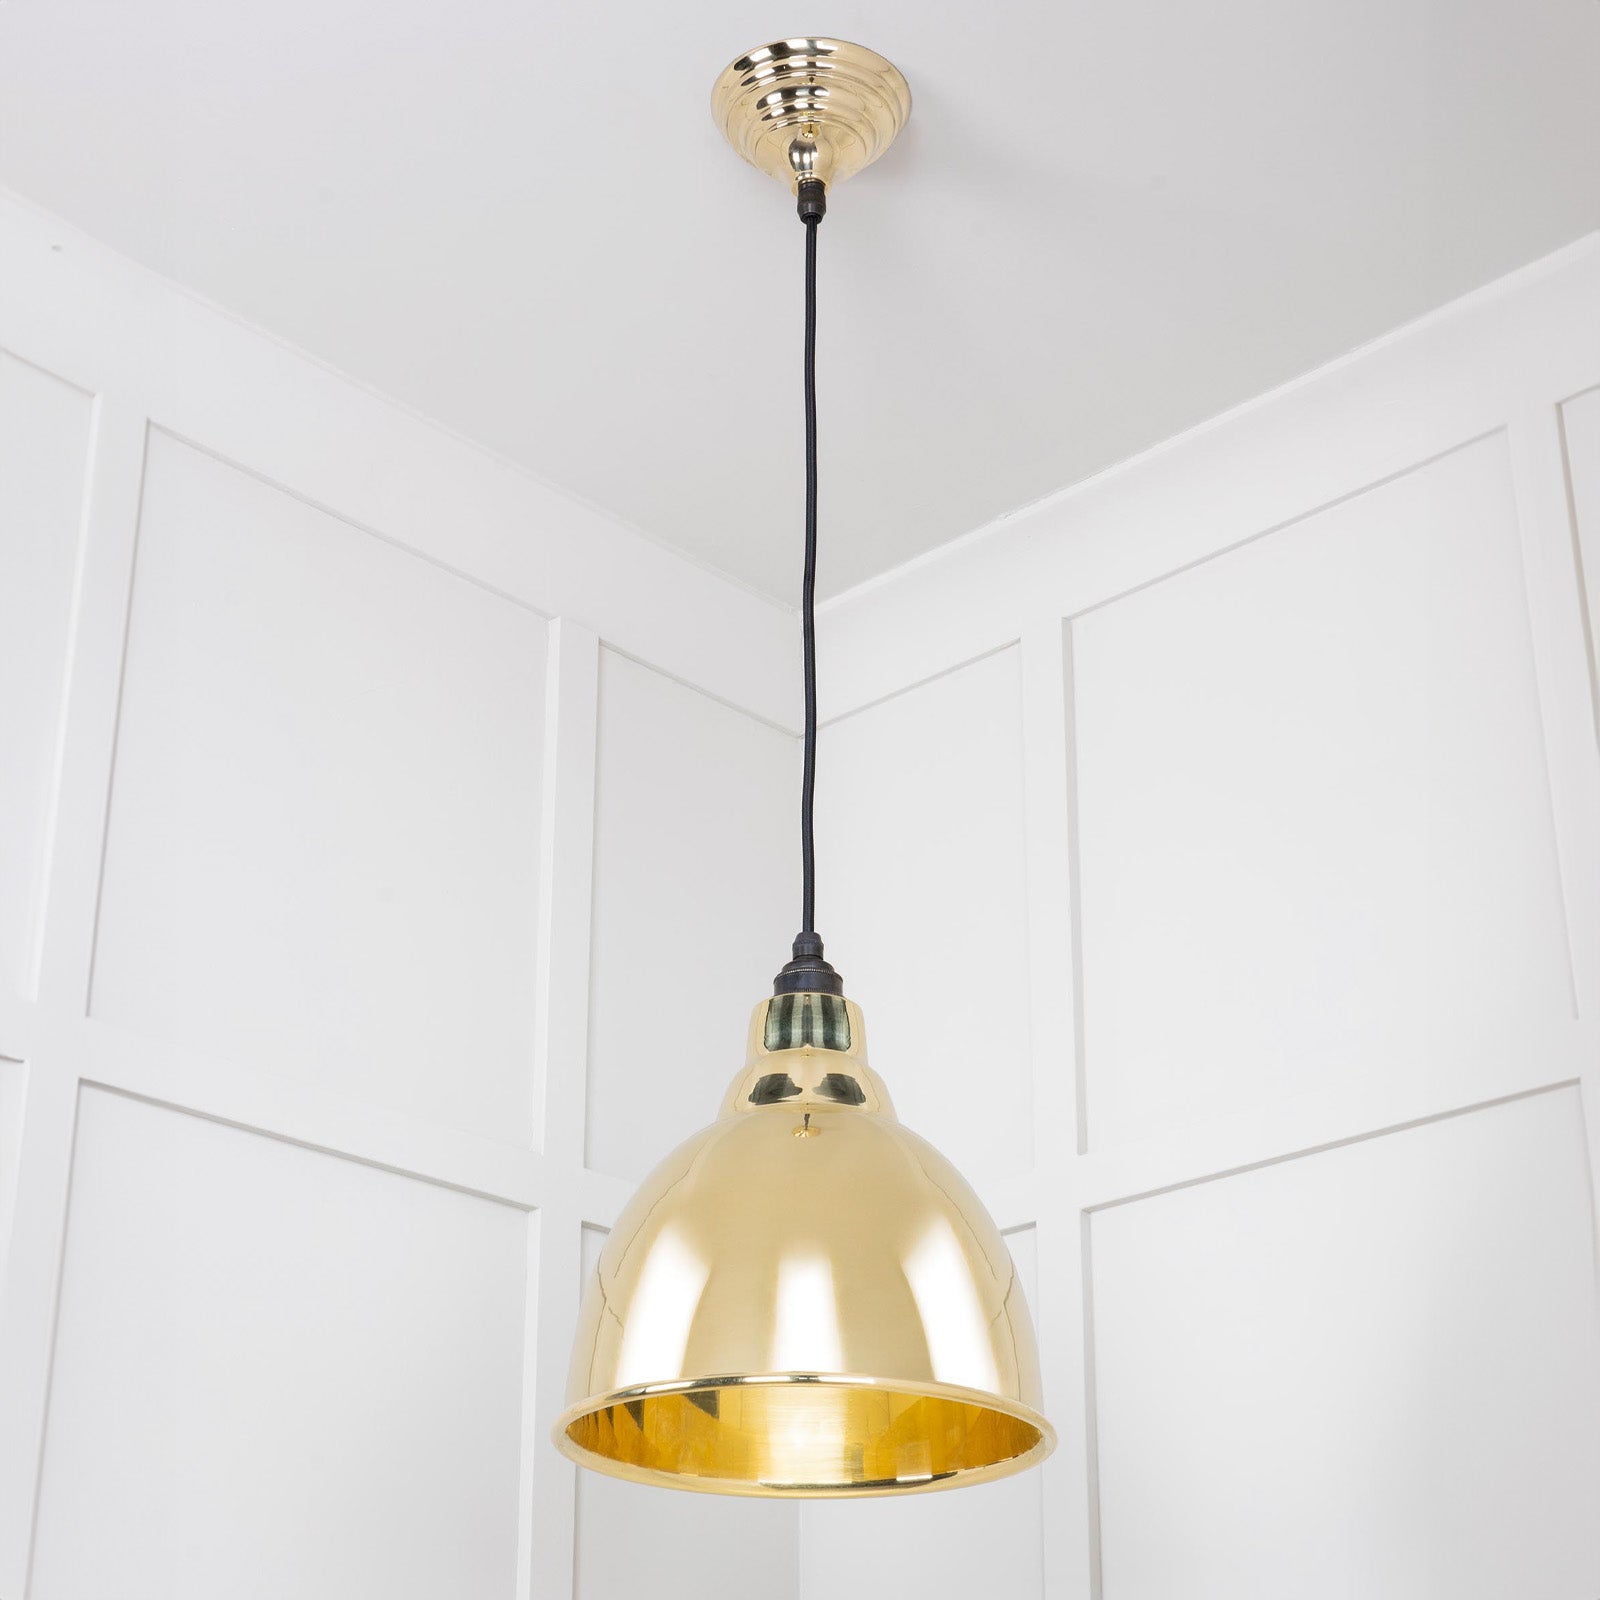 SHOW Full Image of Hanging Brindley Ceiling Light in Brass